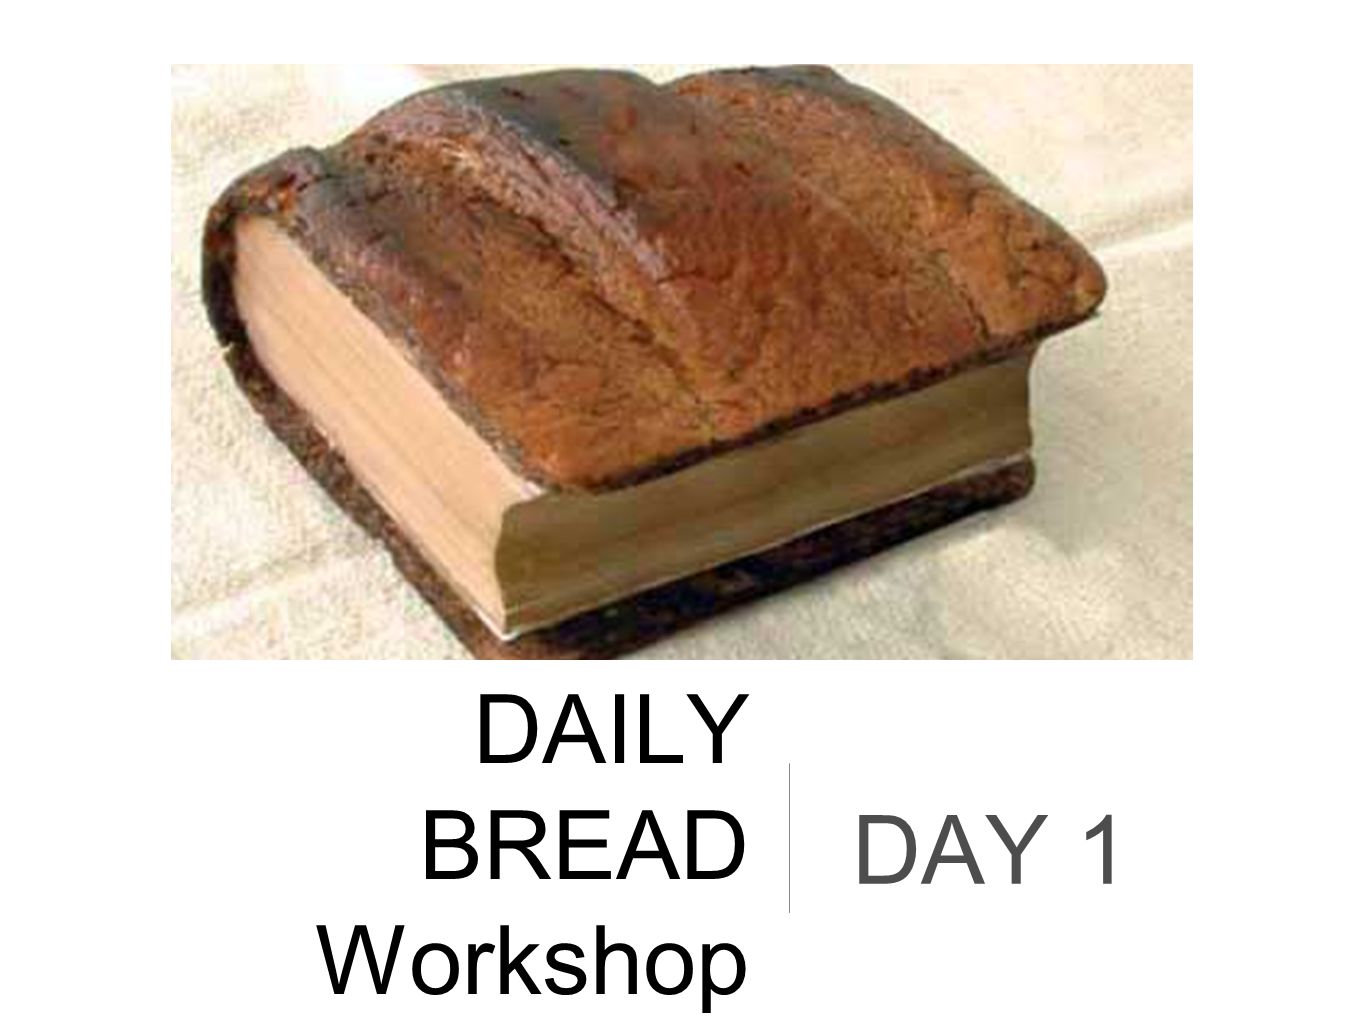 DAILY BREAD Workshop DAY 1